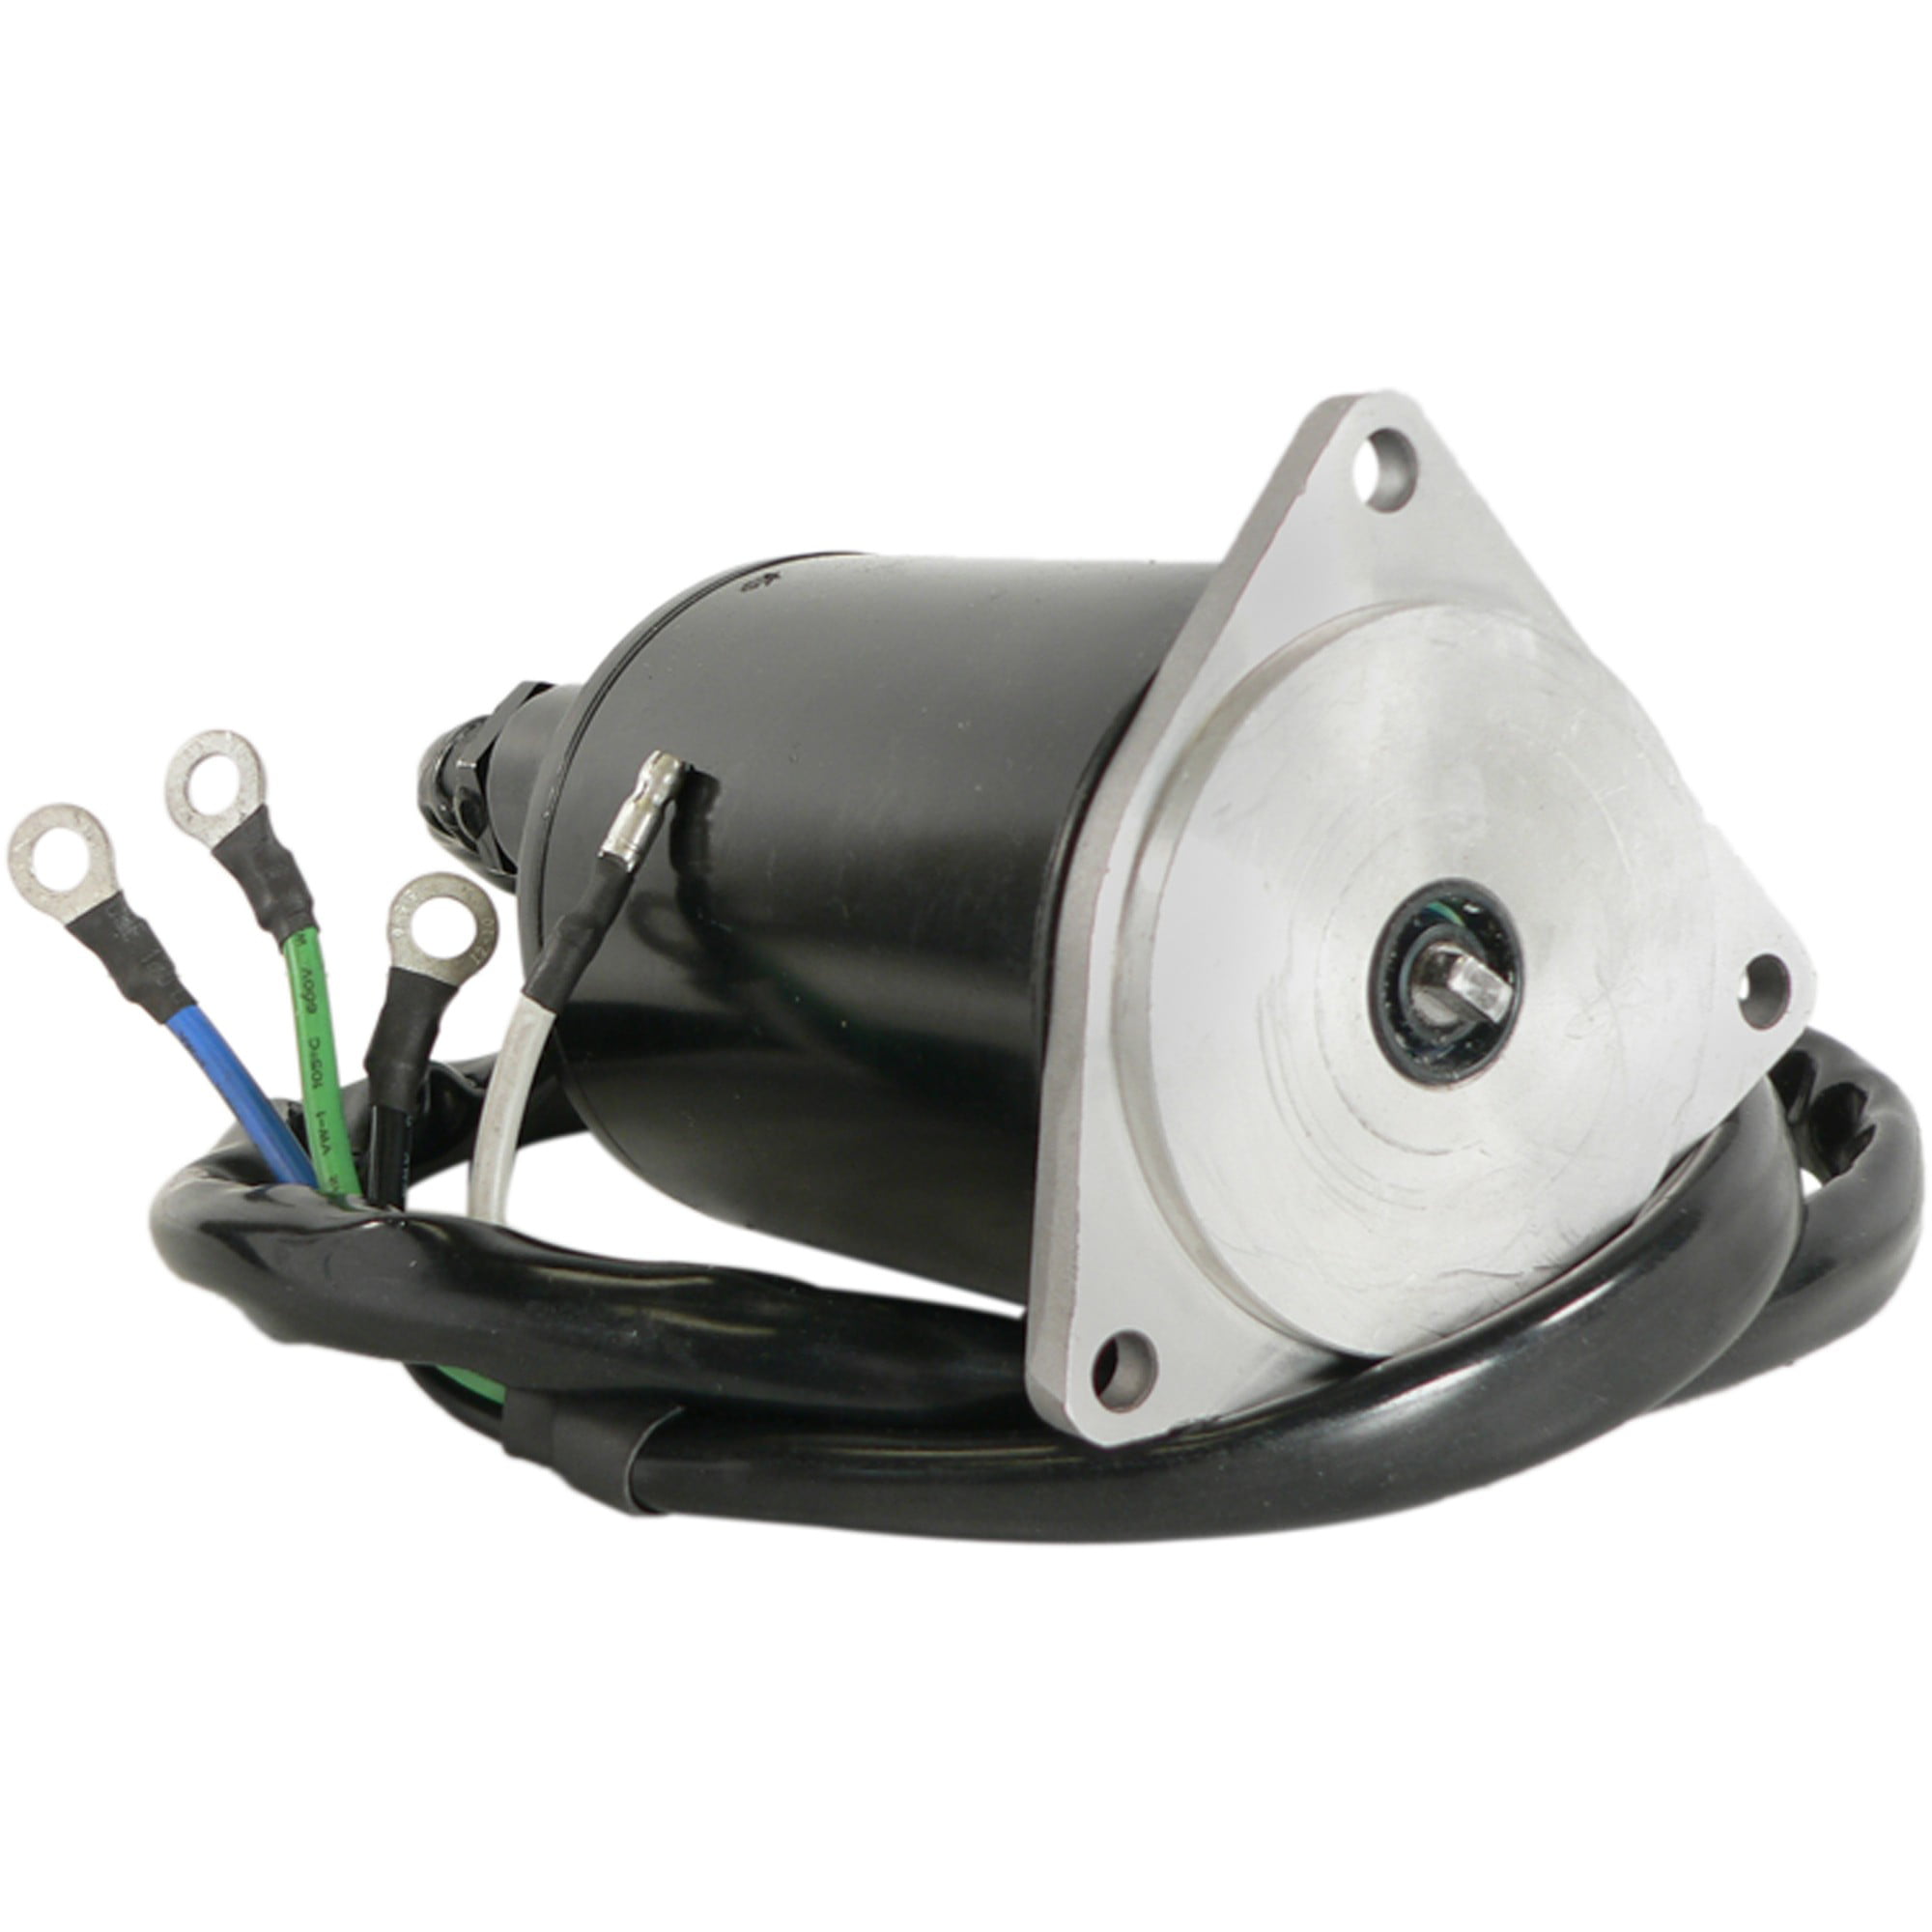 DB Electrical TRM0044 New Tilt Trim Motor Compatible With/Replacement For  Yamaha Outboard 225-250 H.P. 1990-On /61A-43880-01-00, 61A-43880-02-00